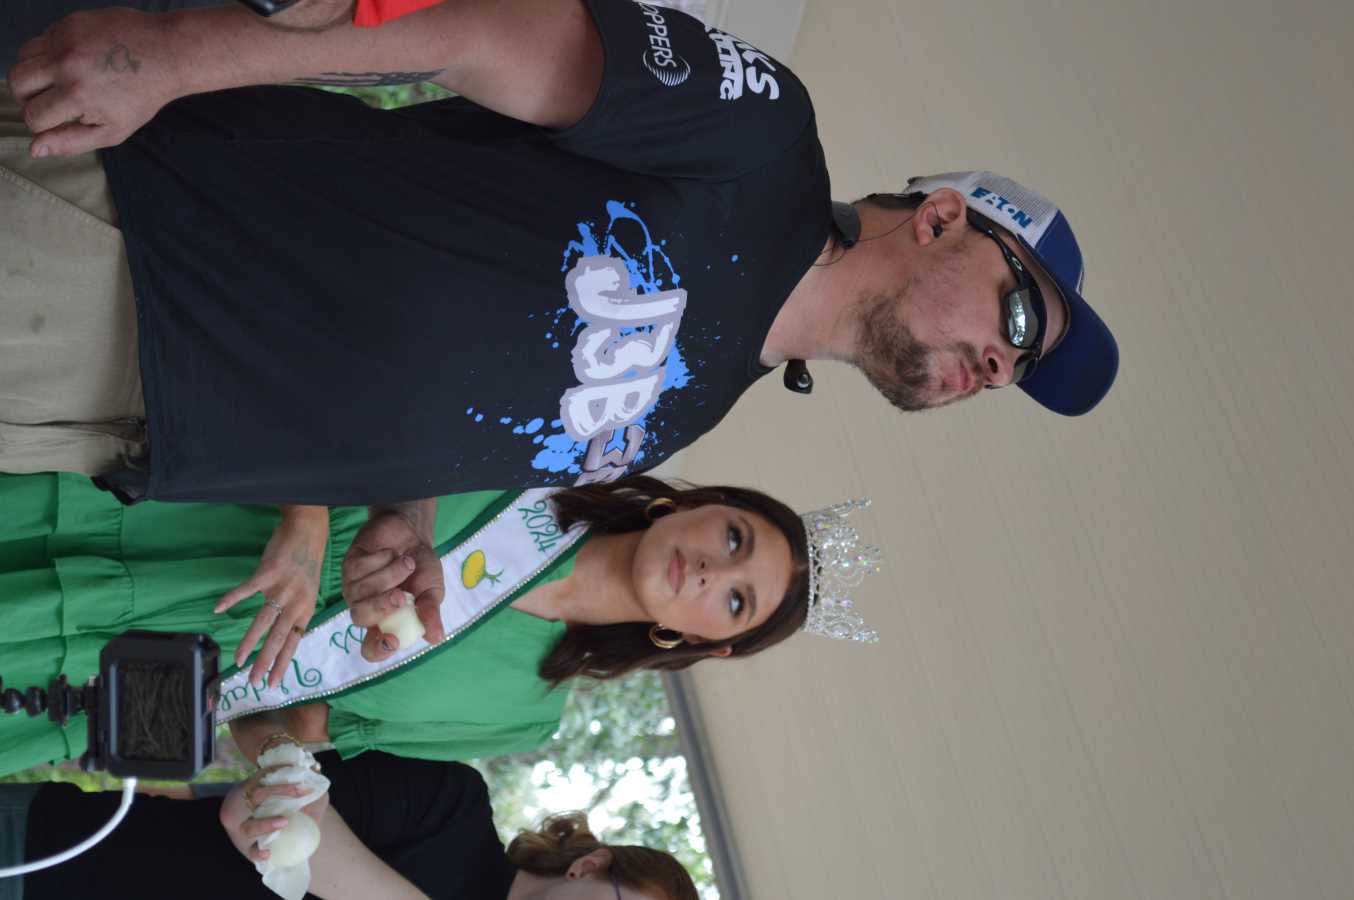 Flowers Retains His Title At the World Famous Vidalia Onion Eating Contest